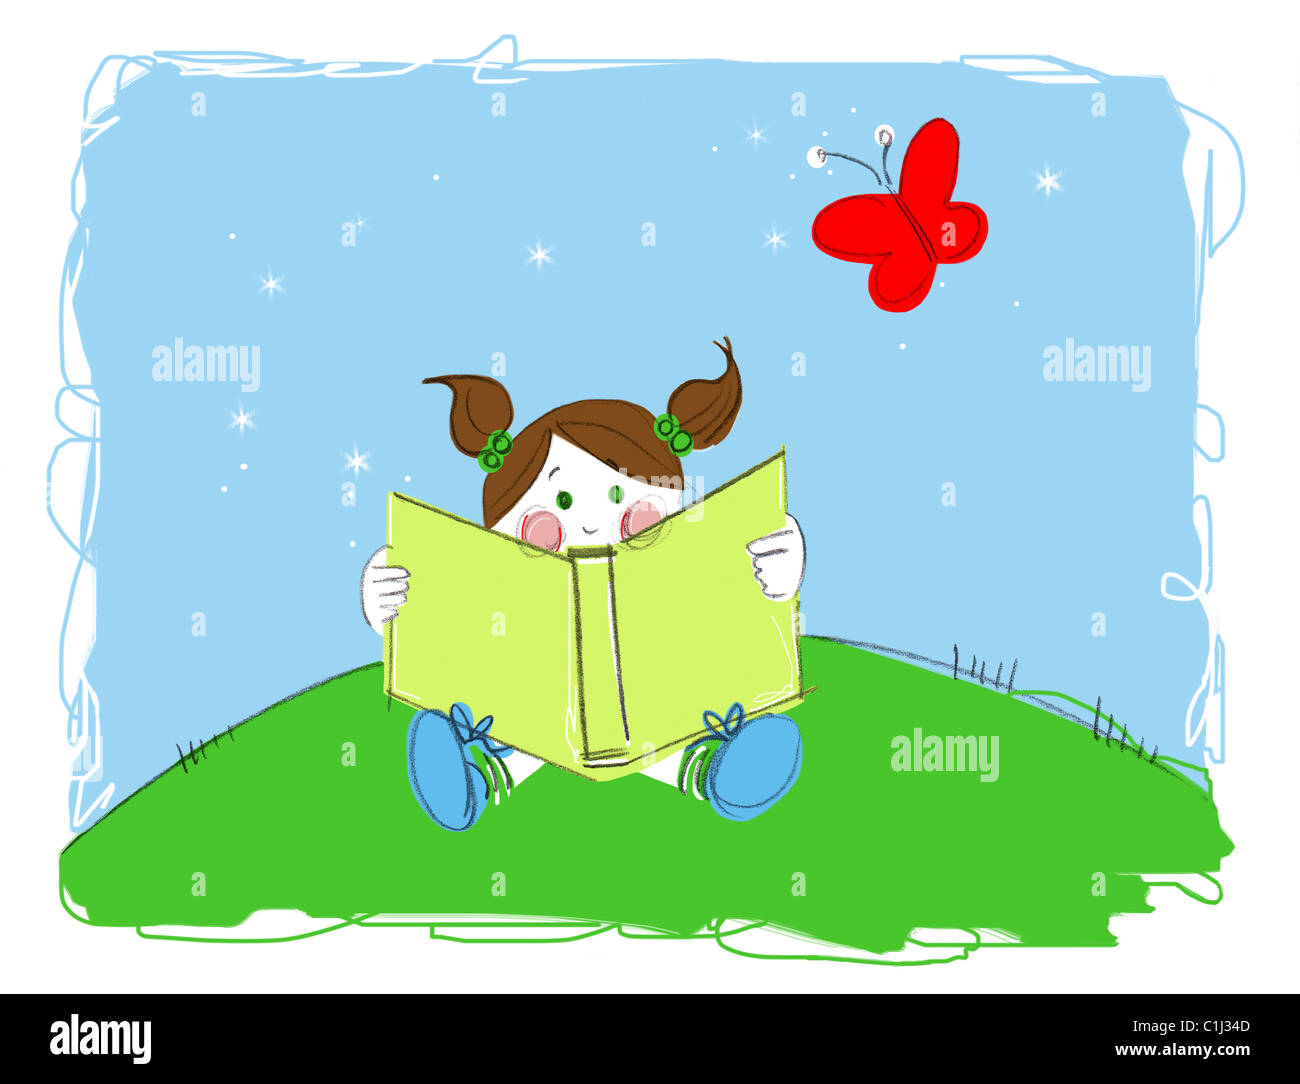 Illustration of Girl Reading a Book Stock Photo